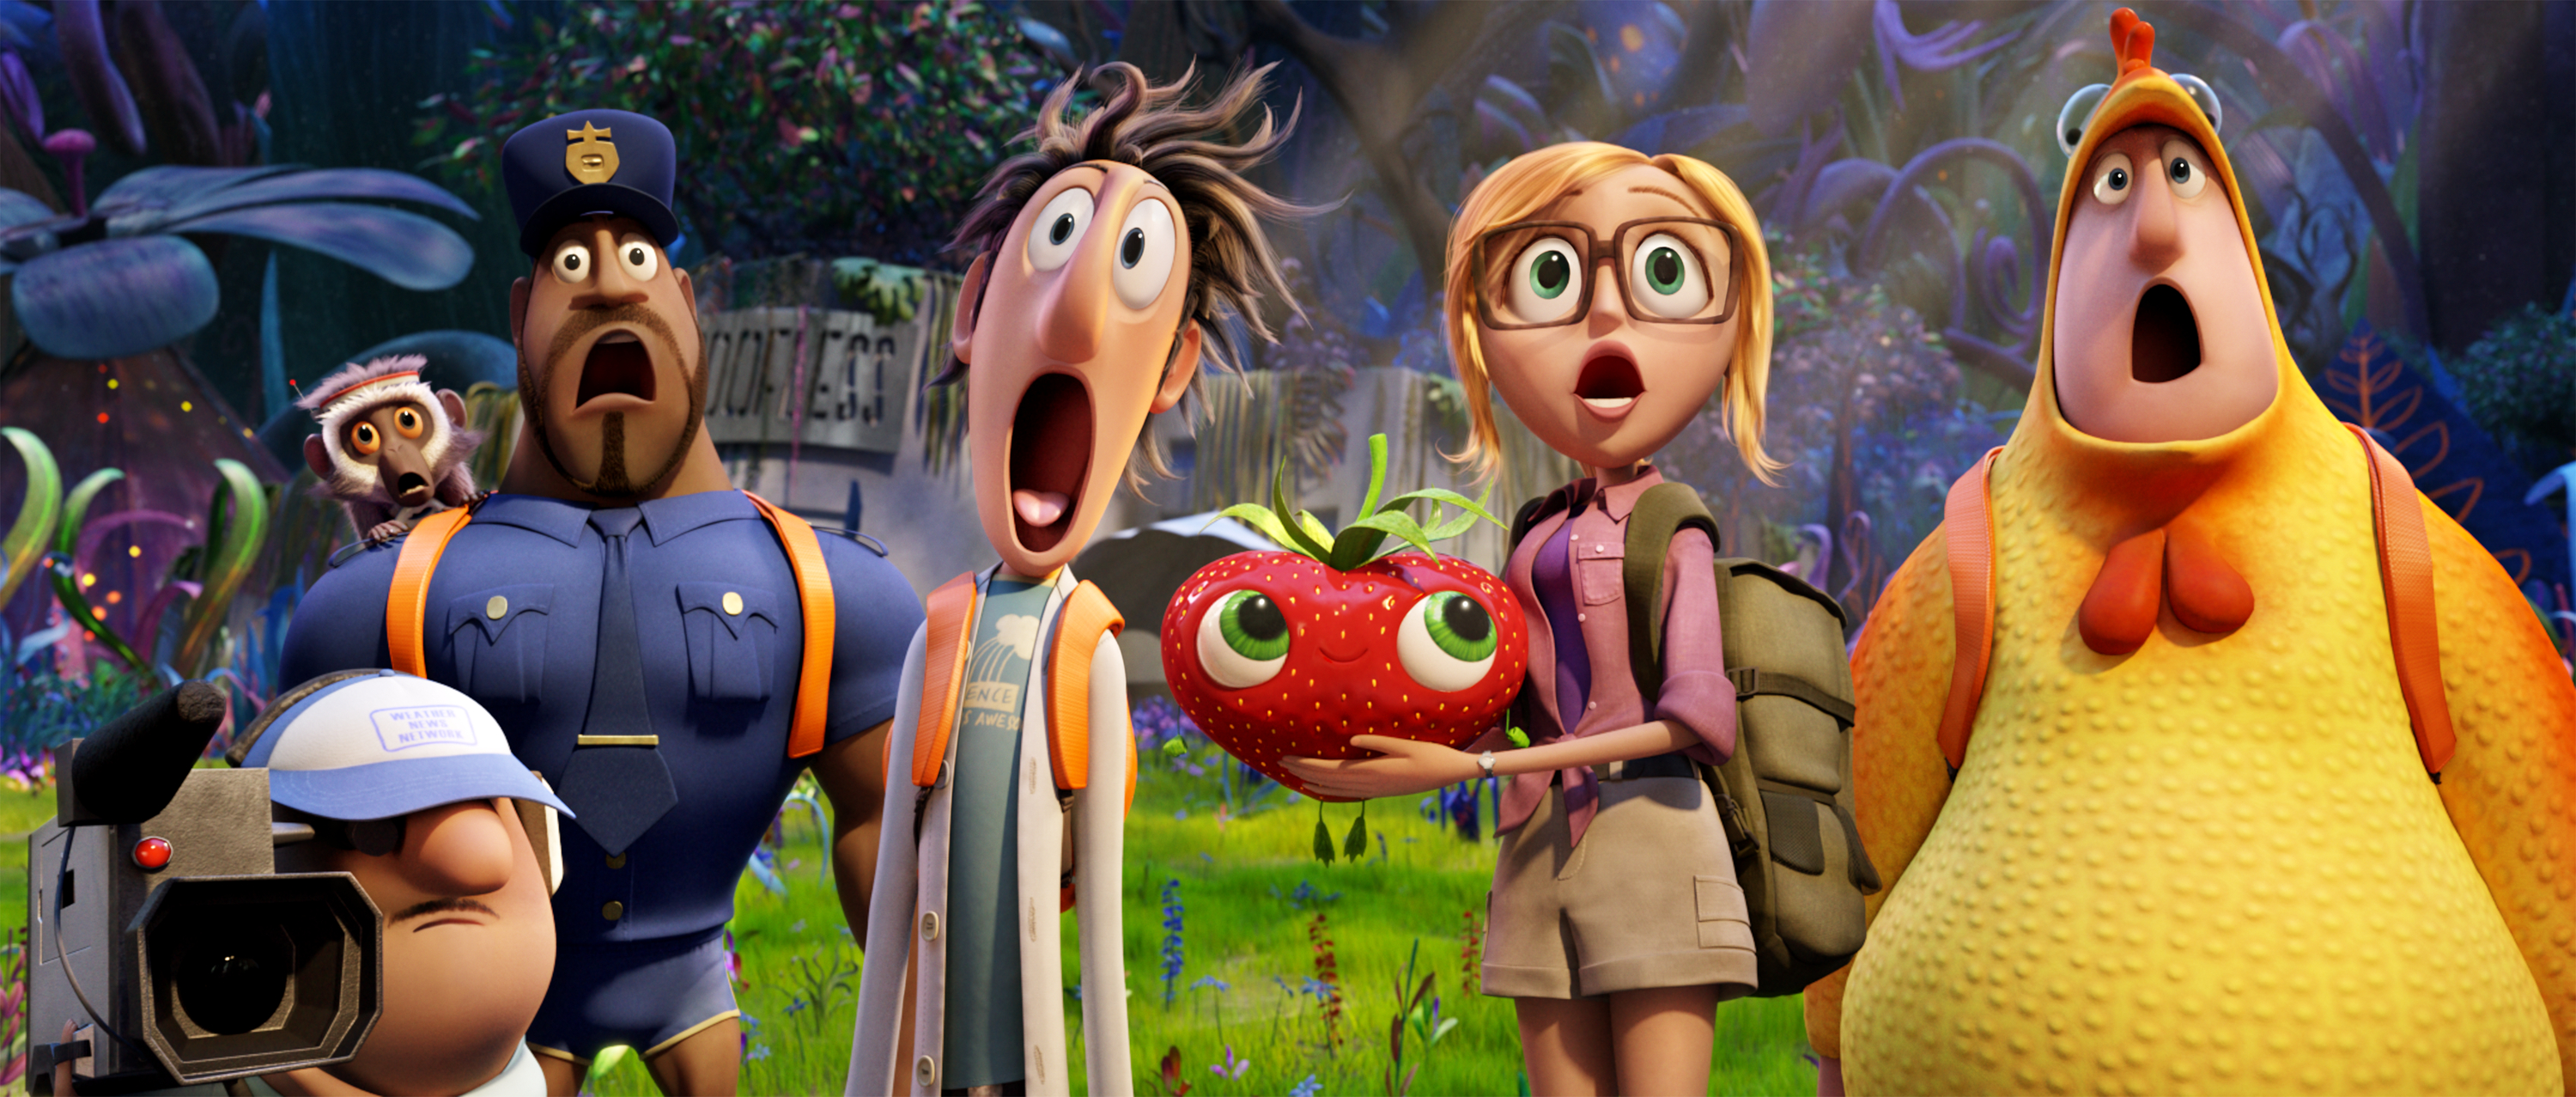 Cloudy With A Chance Of Meatballs #10